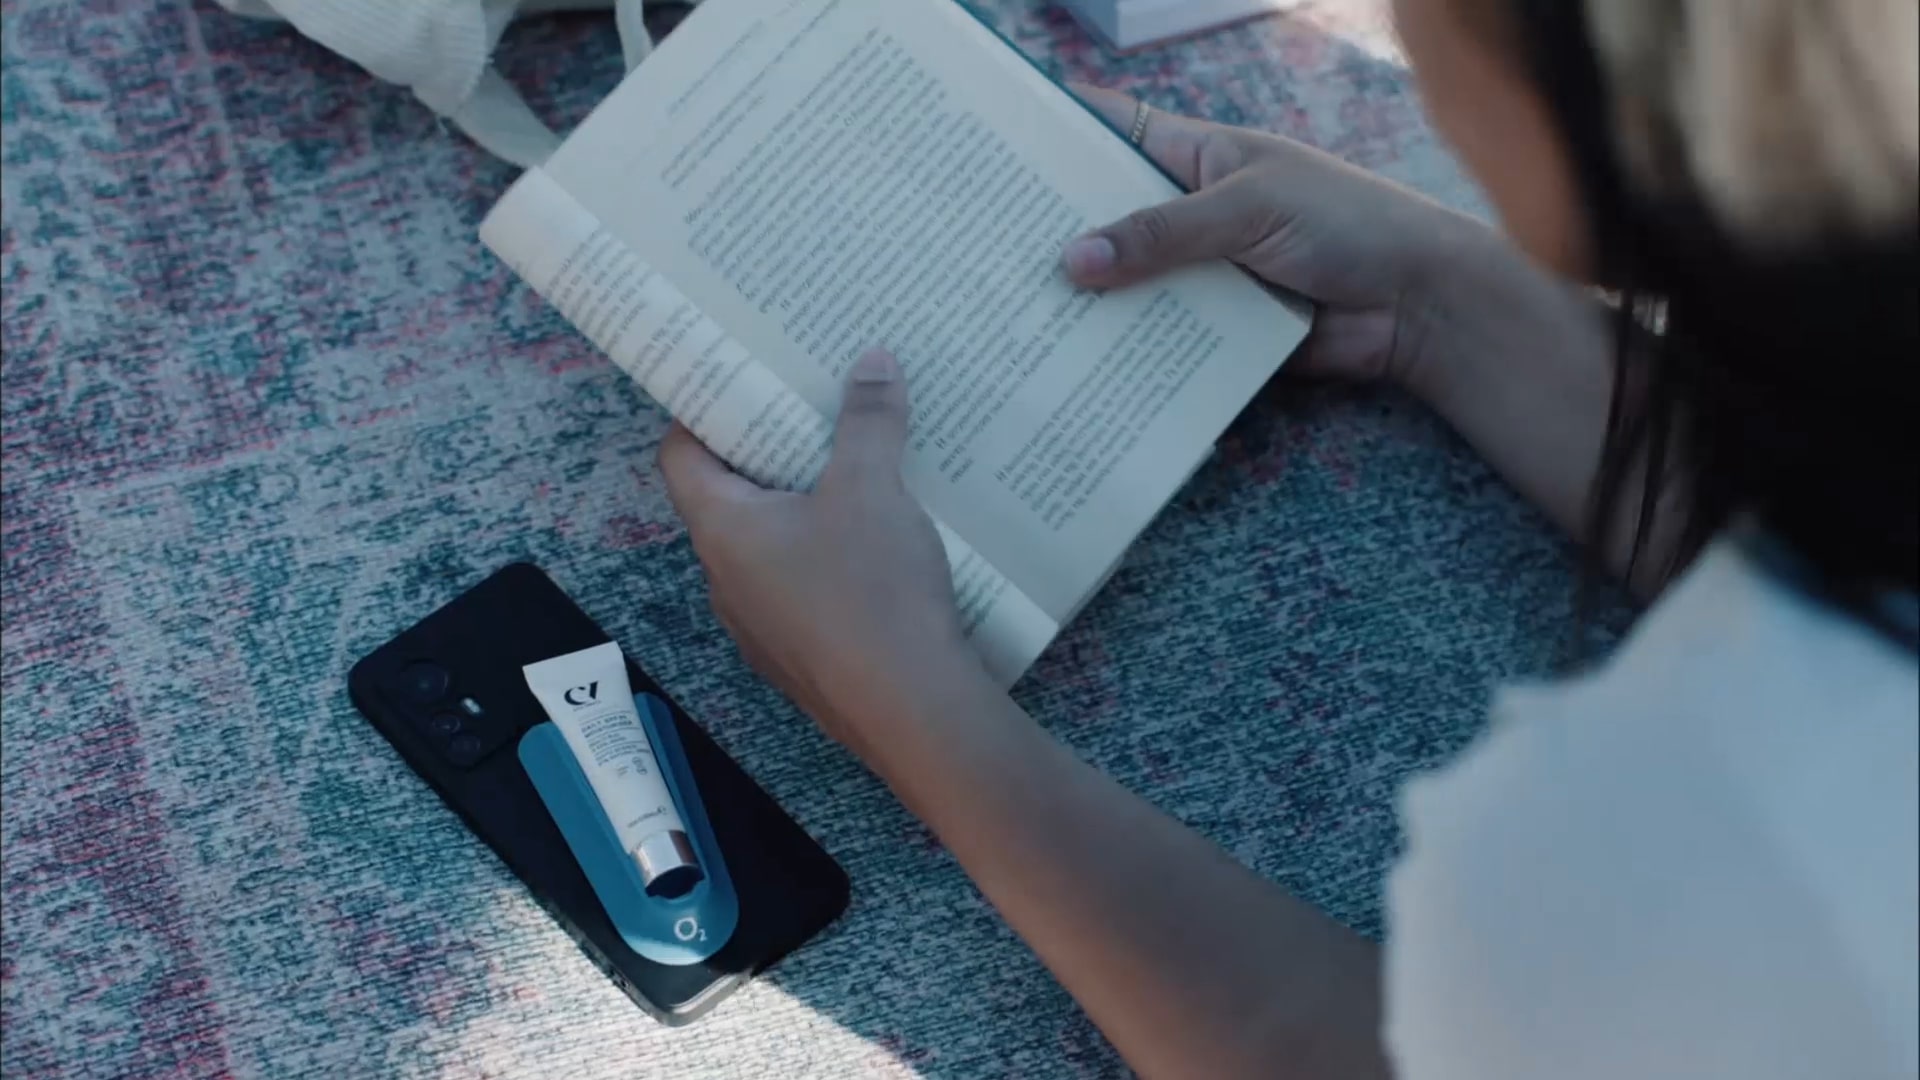 O2 customers receive free summer mobile accessory that takes inspiration from Hailey Bieber’s viral lip case [Video]